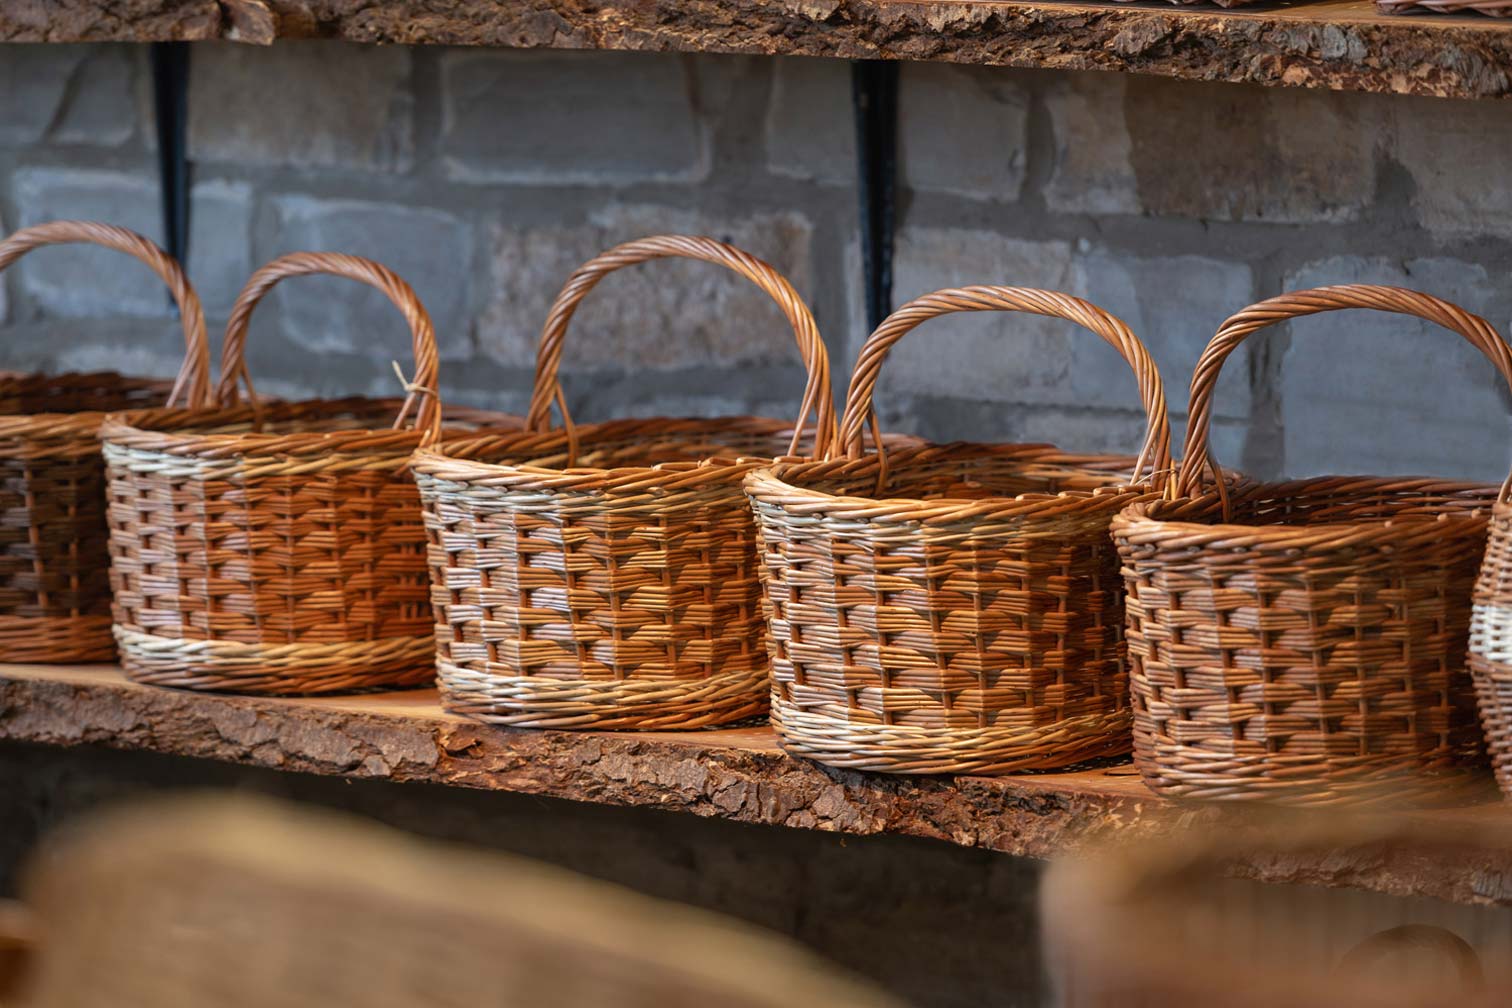 Coates English Willow Baskets - Visitor Centre & Basket Makers